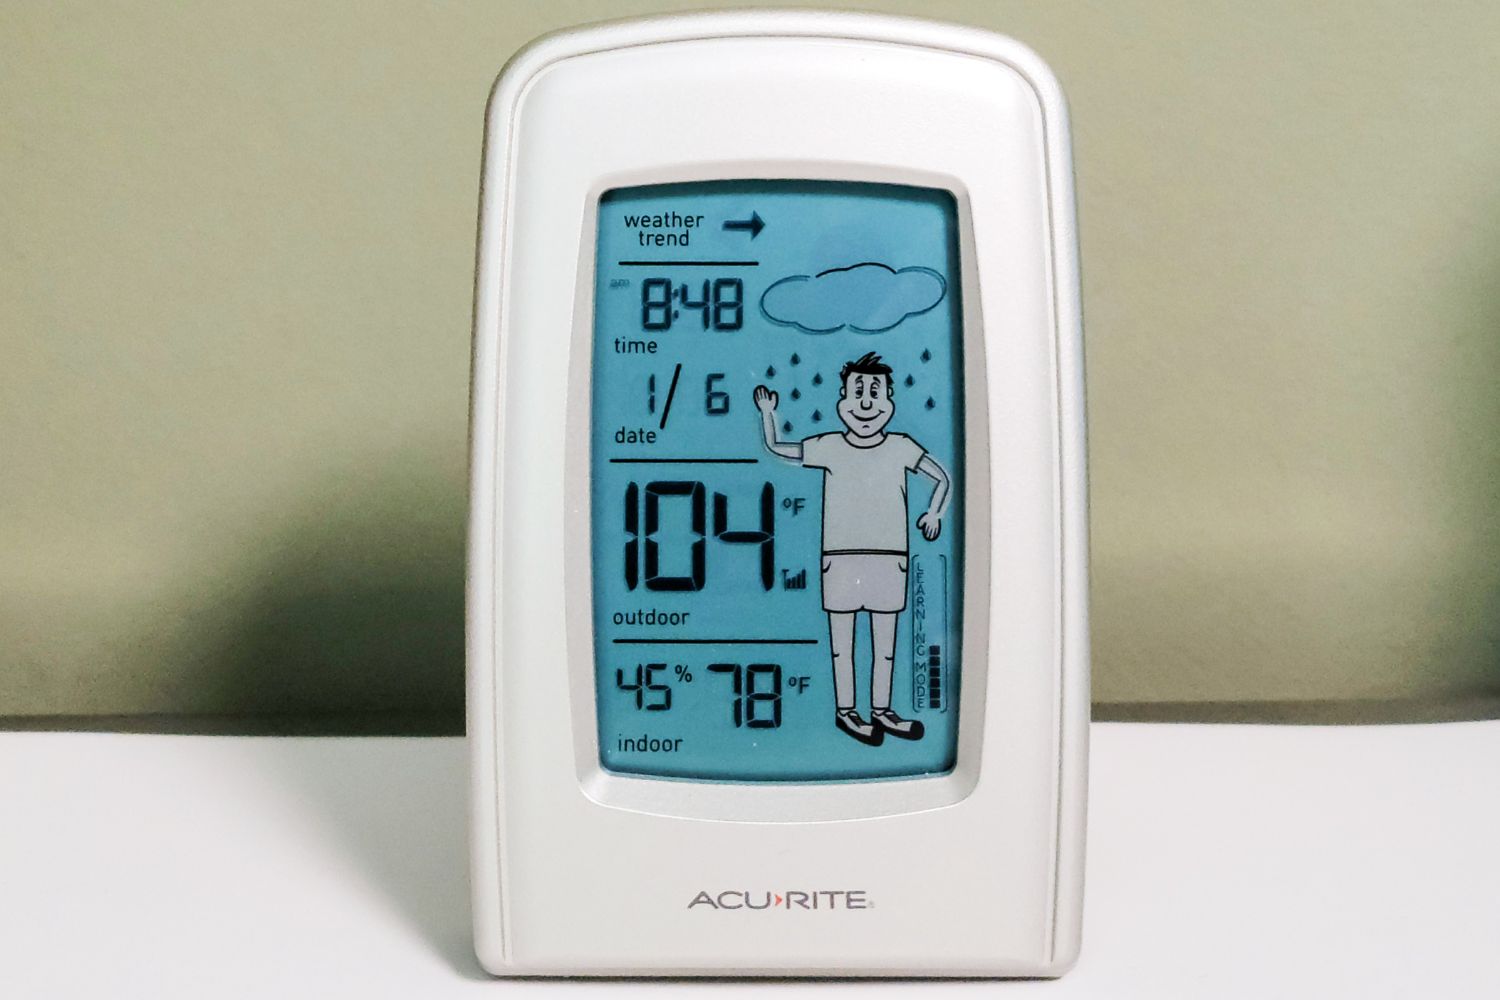 The AcuRite 00827 What-to-Wear Weather Station on a table showing a temperature of 104 degrees Fahrenheit next to an image of a boy wearing shorts.